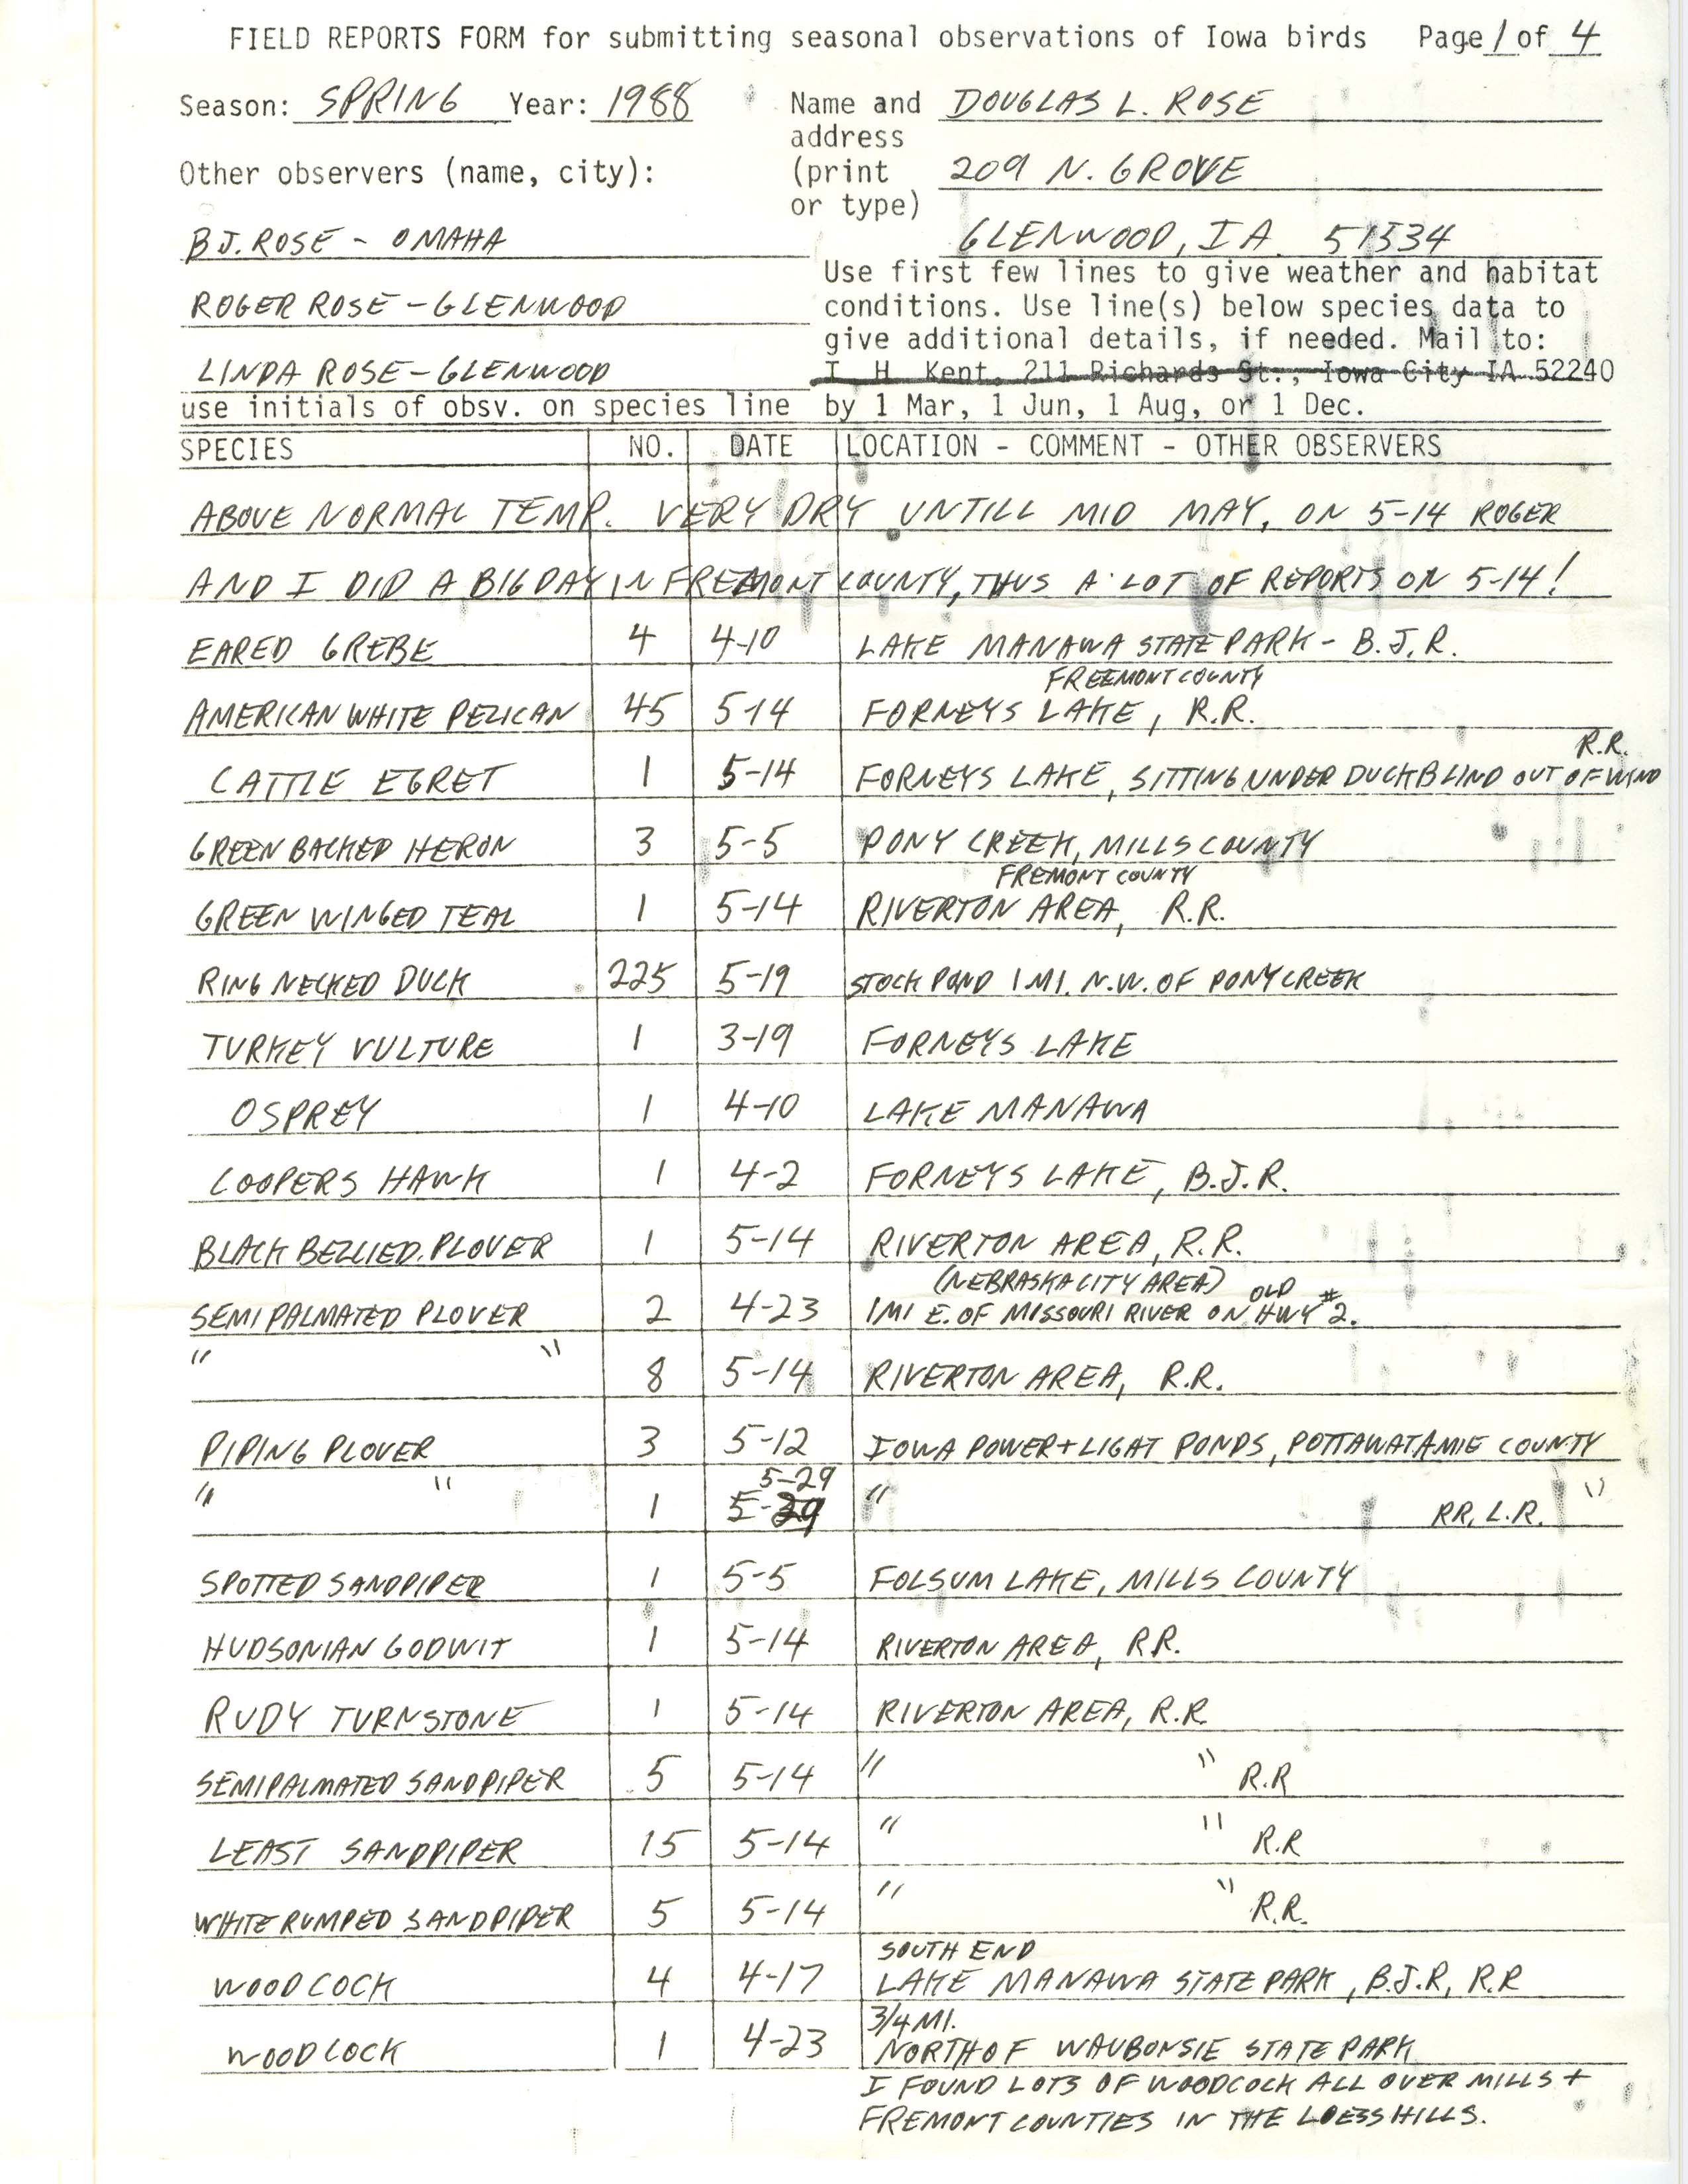 Field reports form for submitting seasonal observations of Iowa birds, Douglas Rose, spring 1988